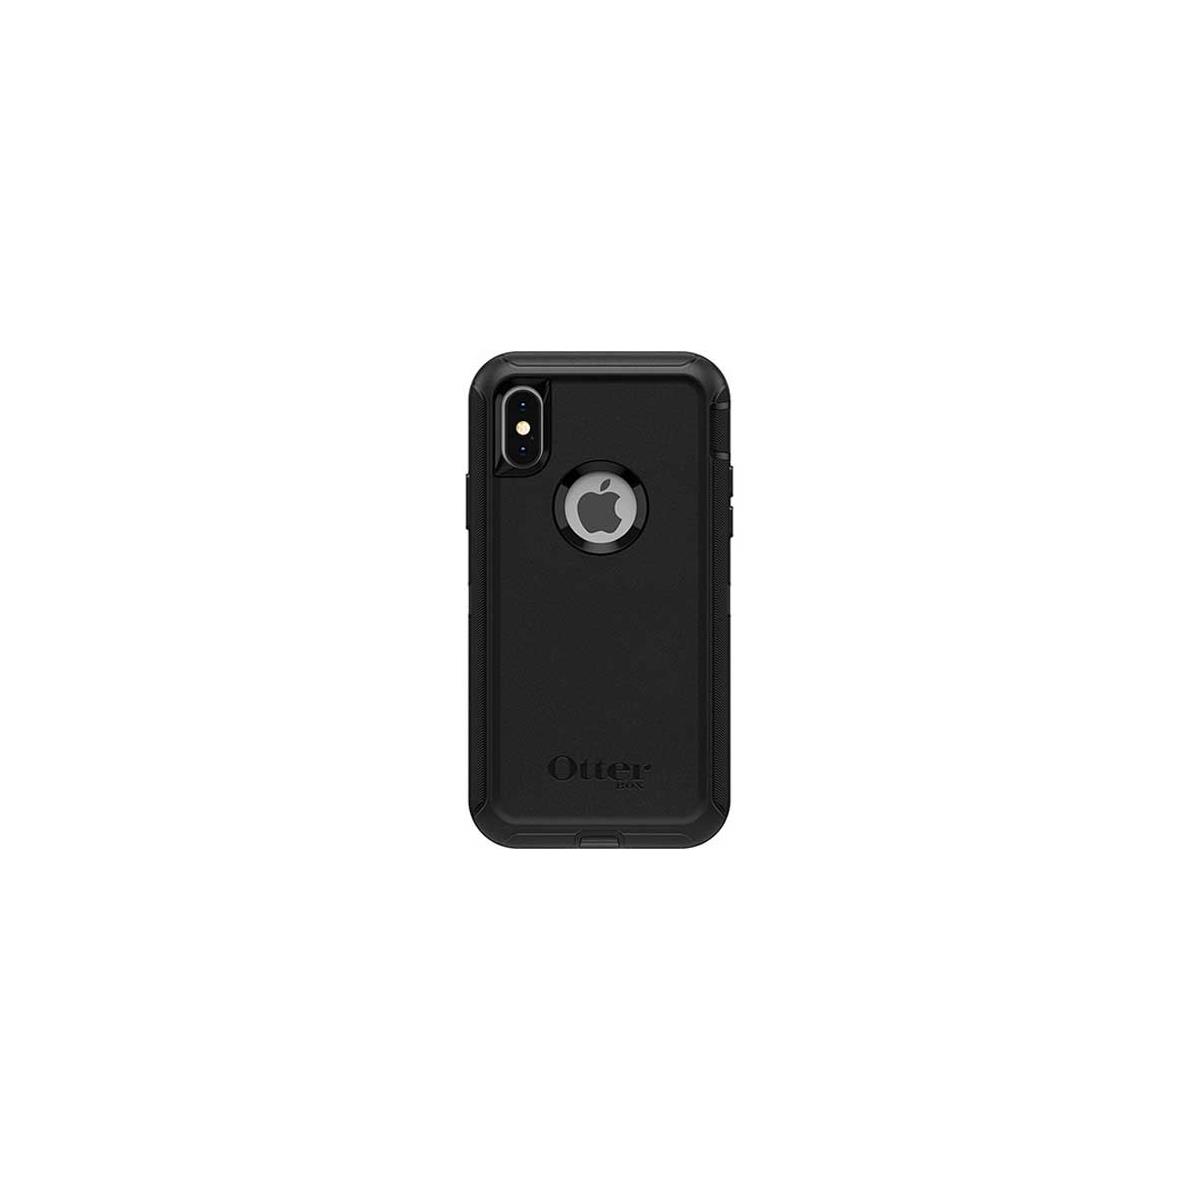 Image of OtterBox Defender Case for iPhone X/Xs - Black